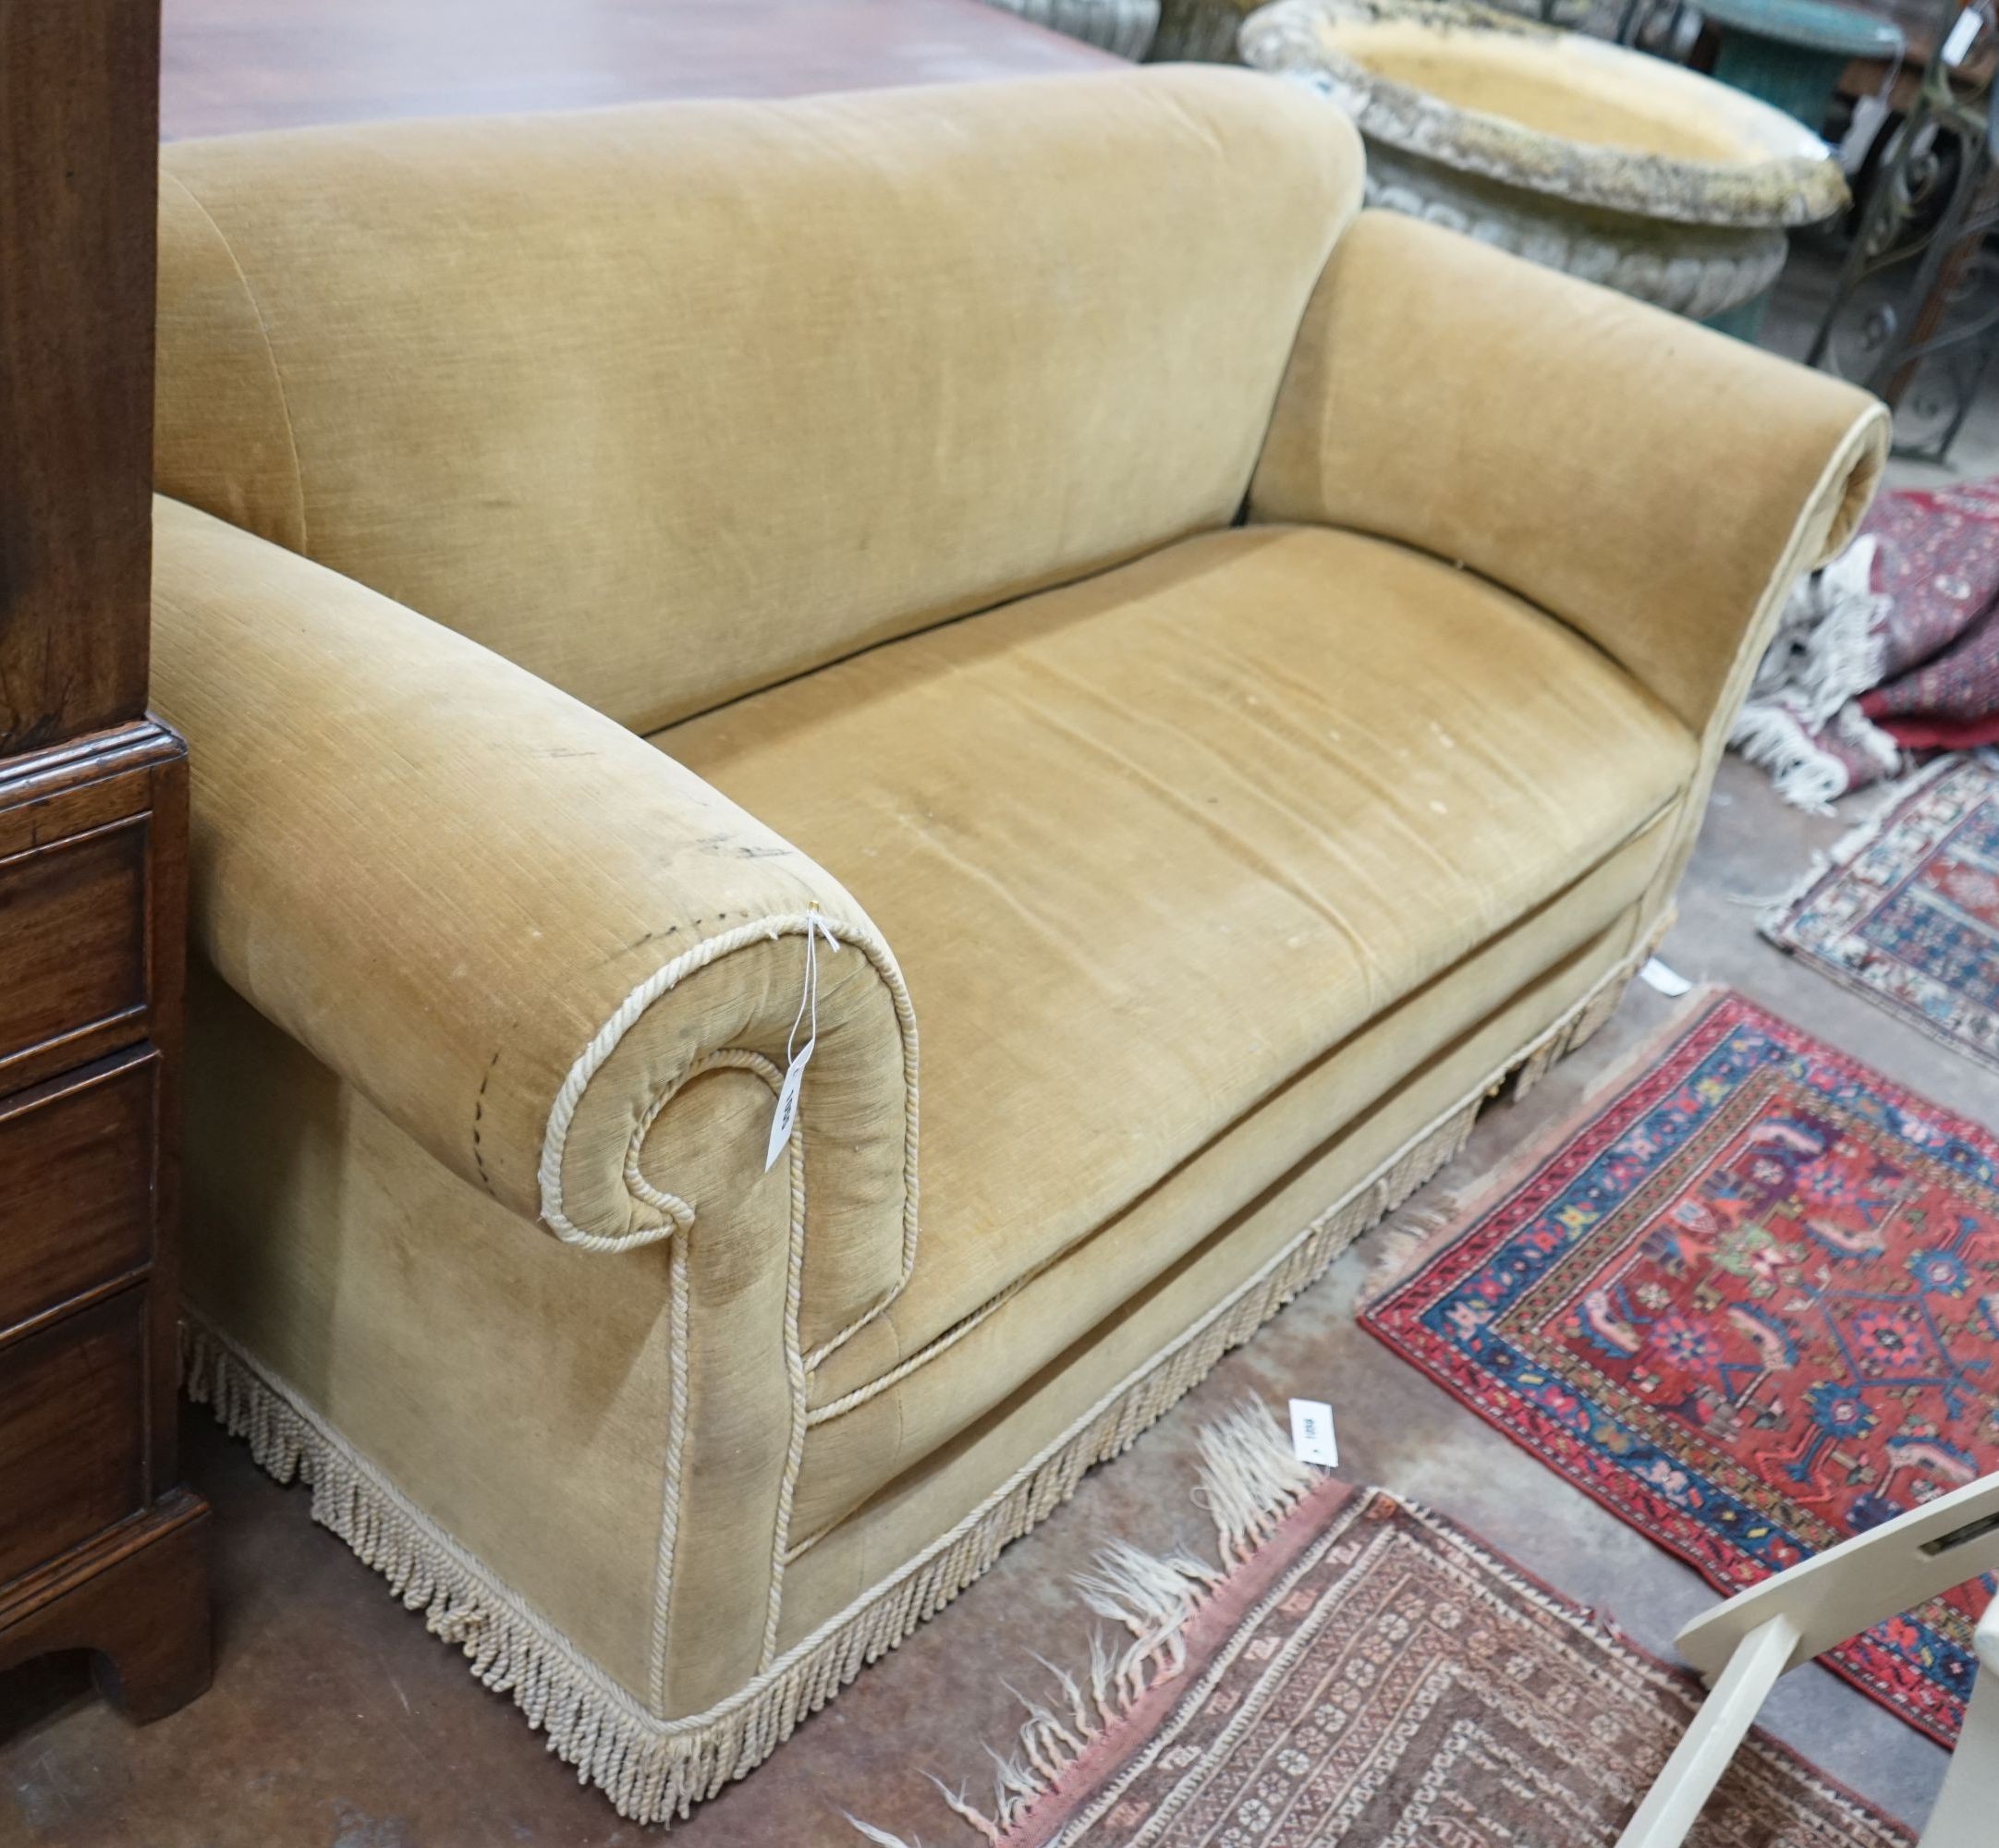 An early 20th century drop arm Chesterfield settee upholstered in gold dralon, operating handle with ivorine plaque marked “Patent 18092 1901” length 190 cm depth 77 cm height 82 cm.